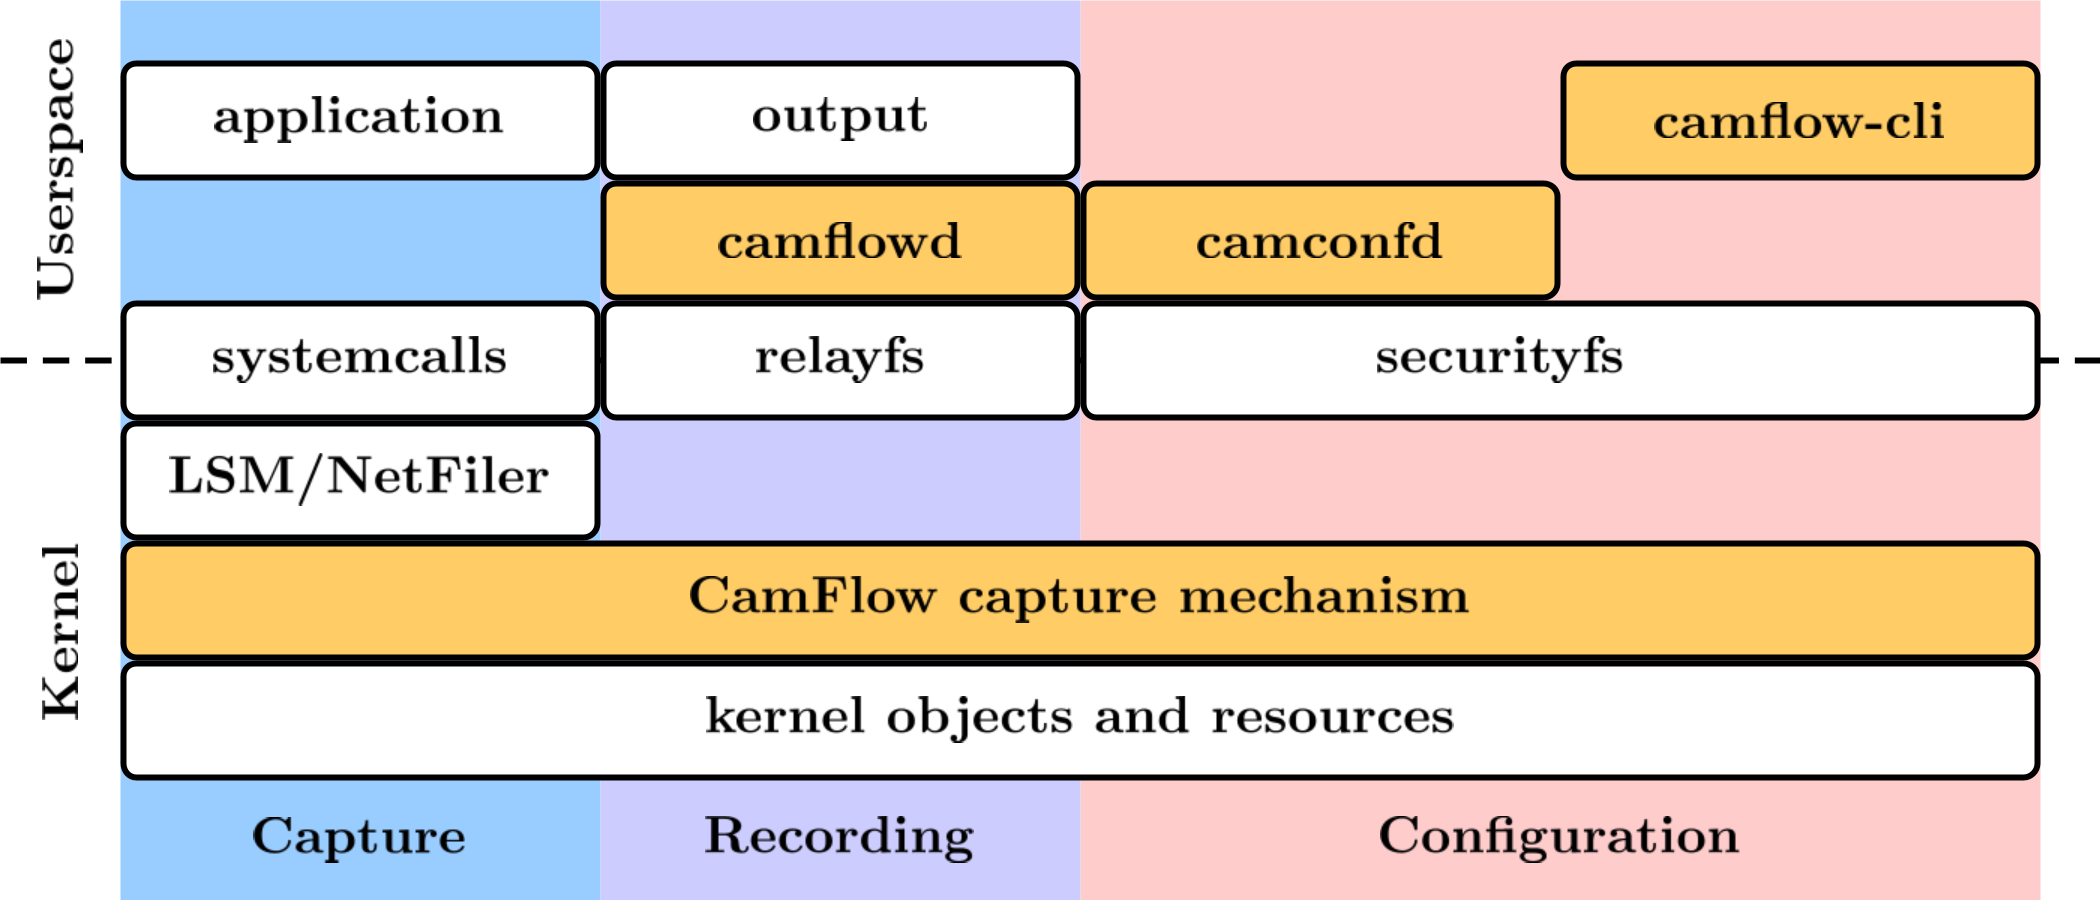 CamFlow architecture overview